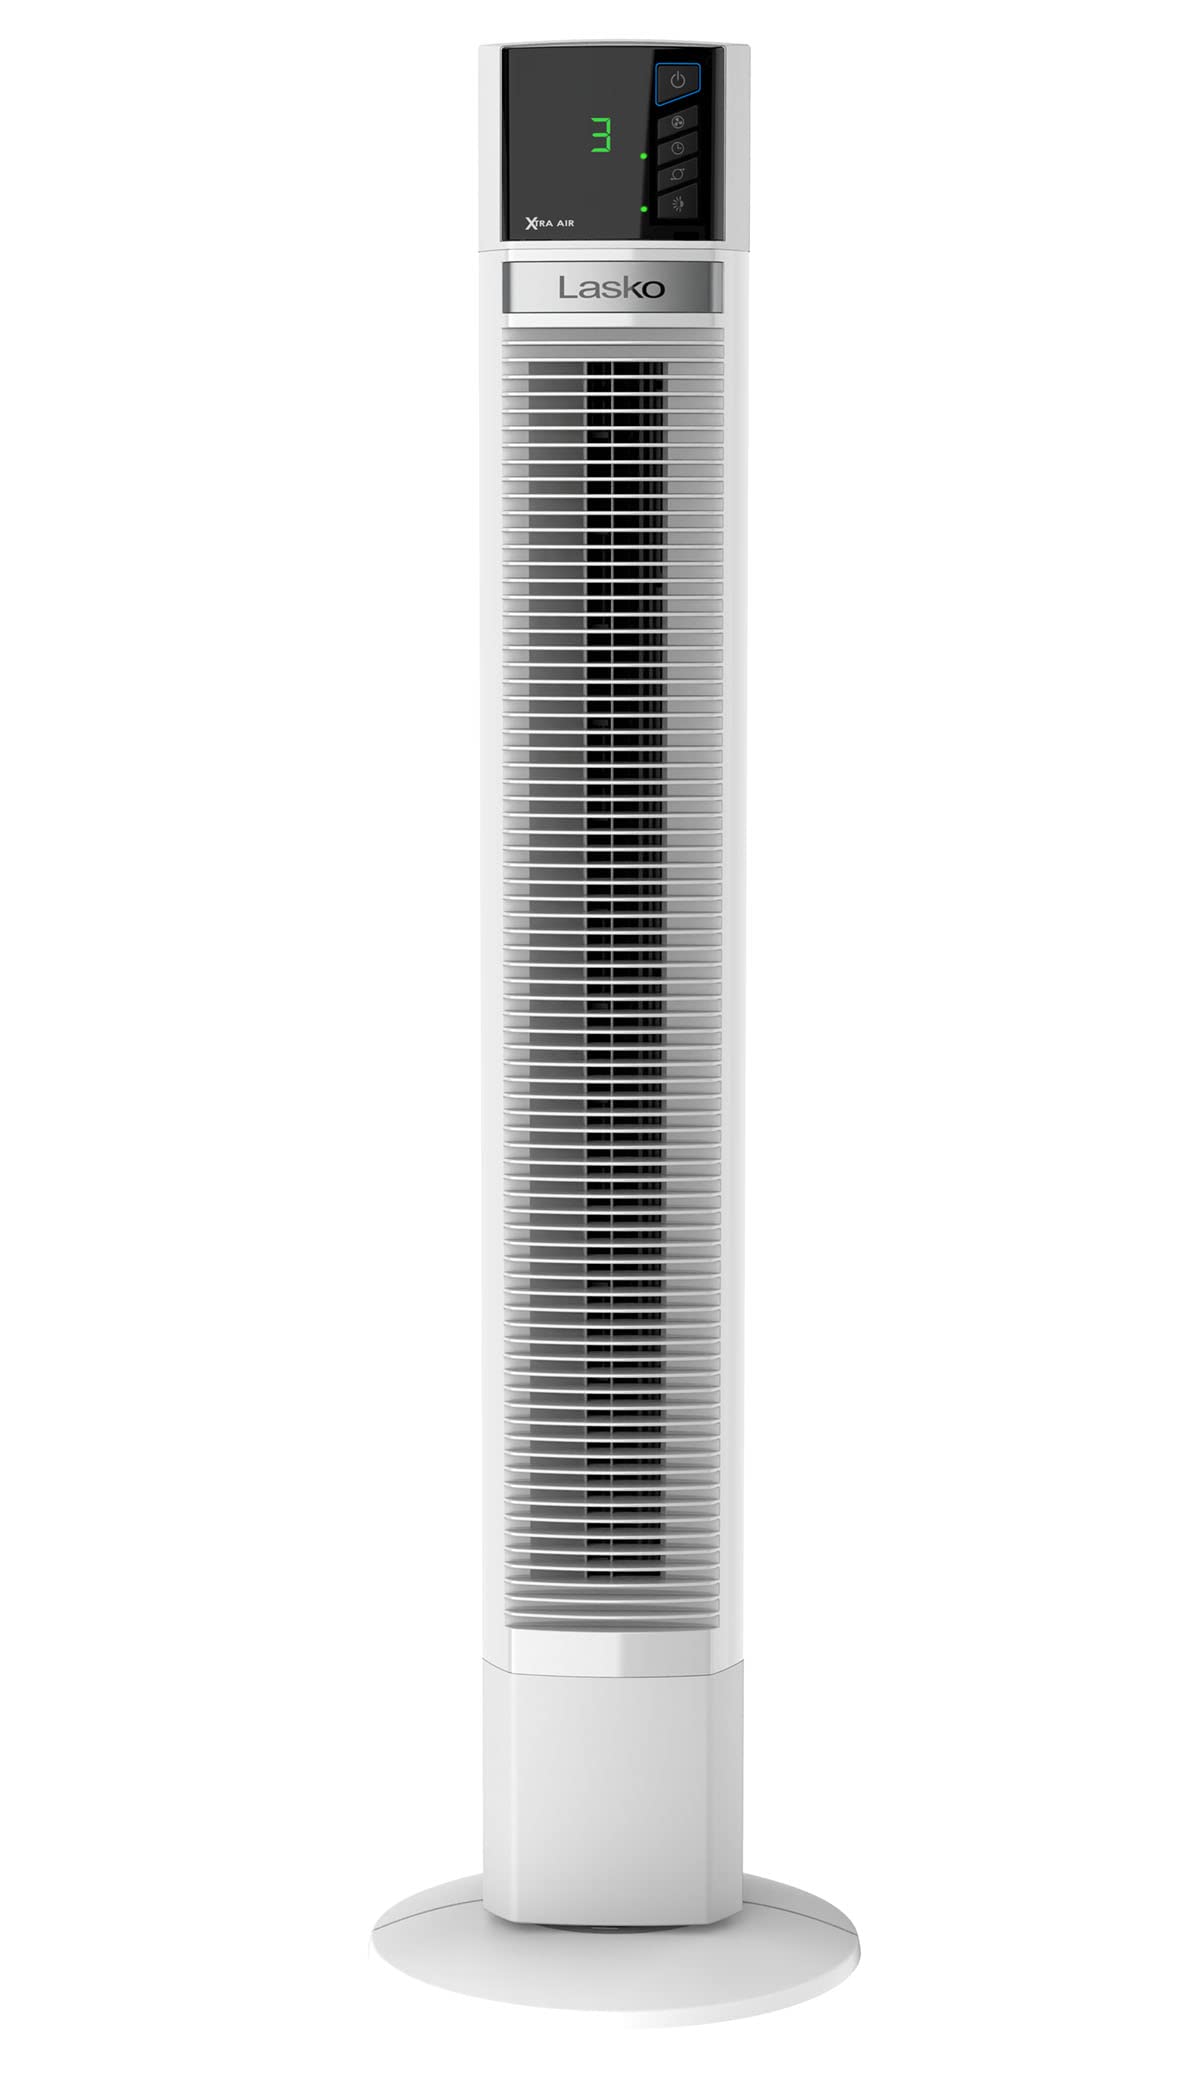 Lasko Xtra Air Oscillating Tower Fan, 4 Speeds, Nighttime Setting, Timer and Remote Control, 48